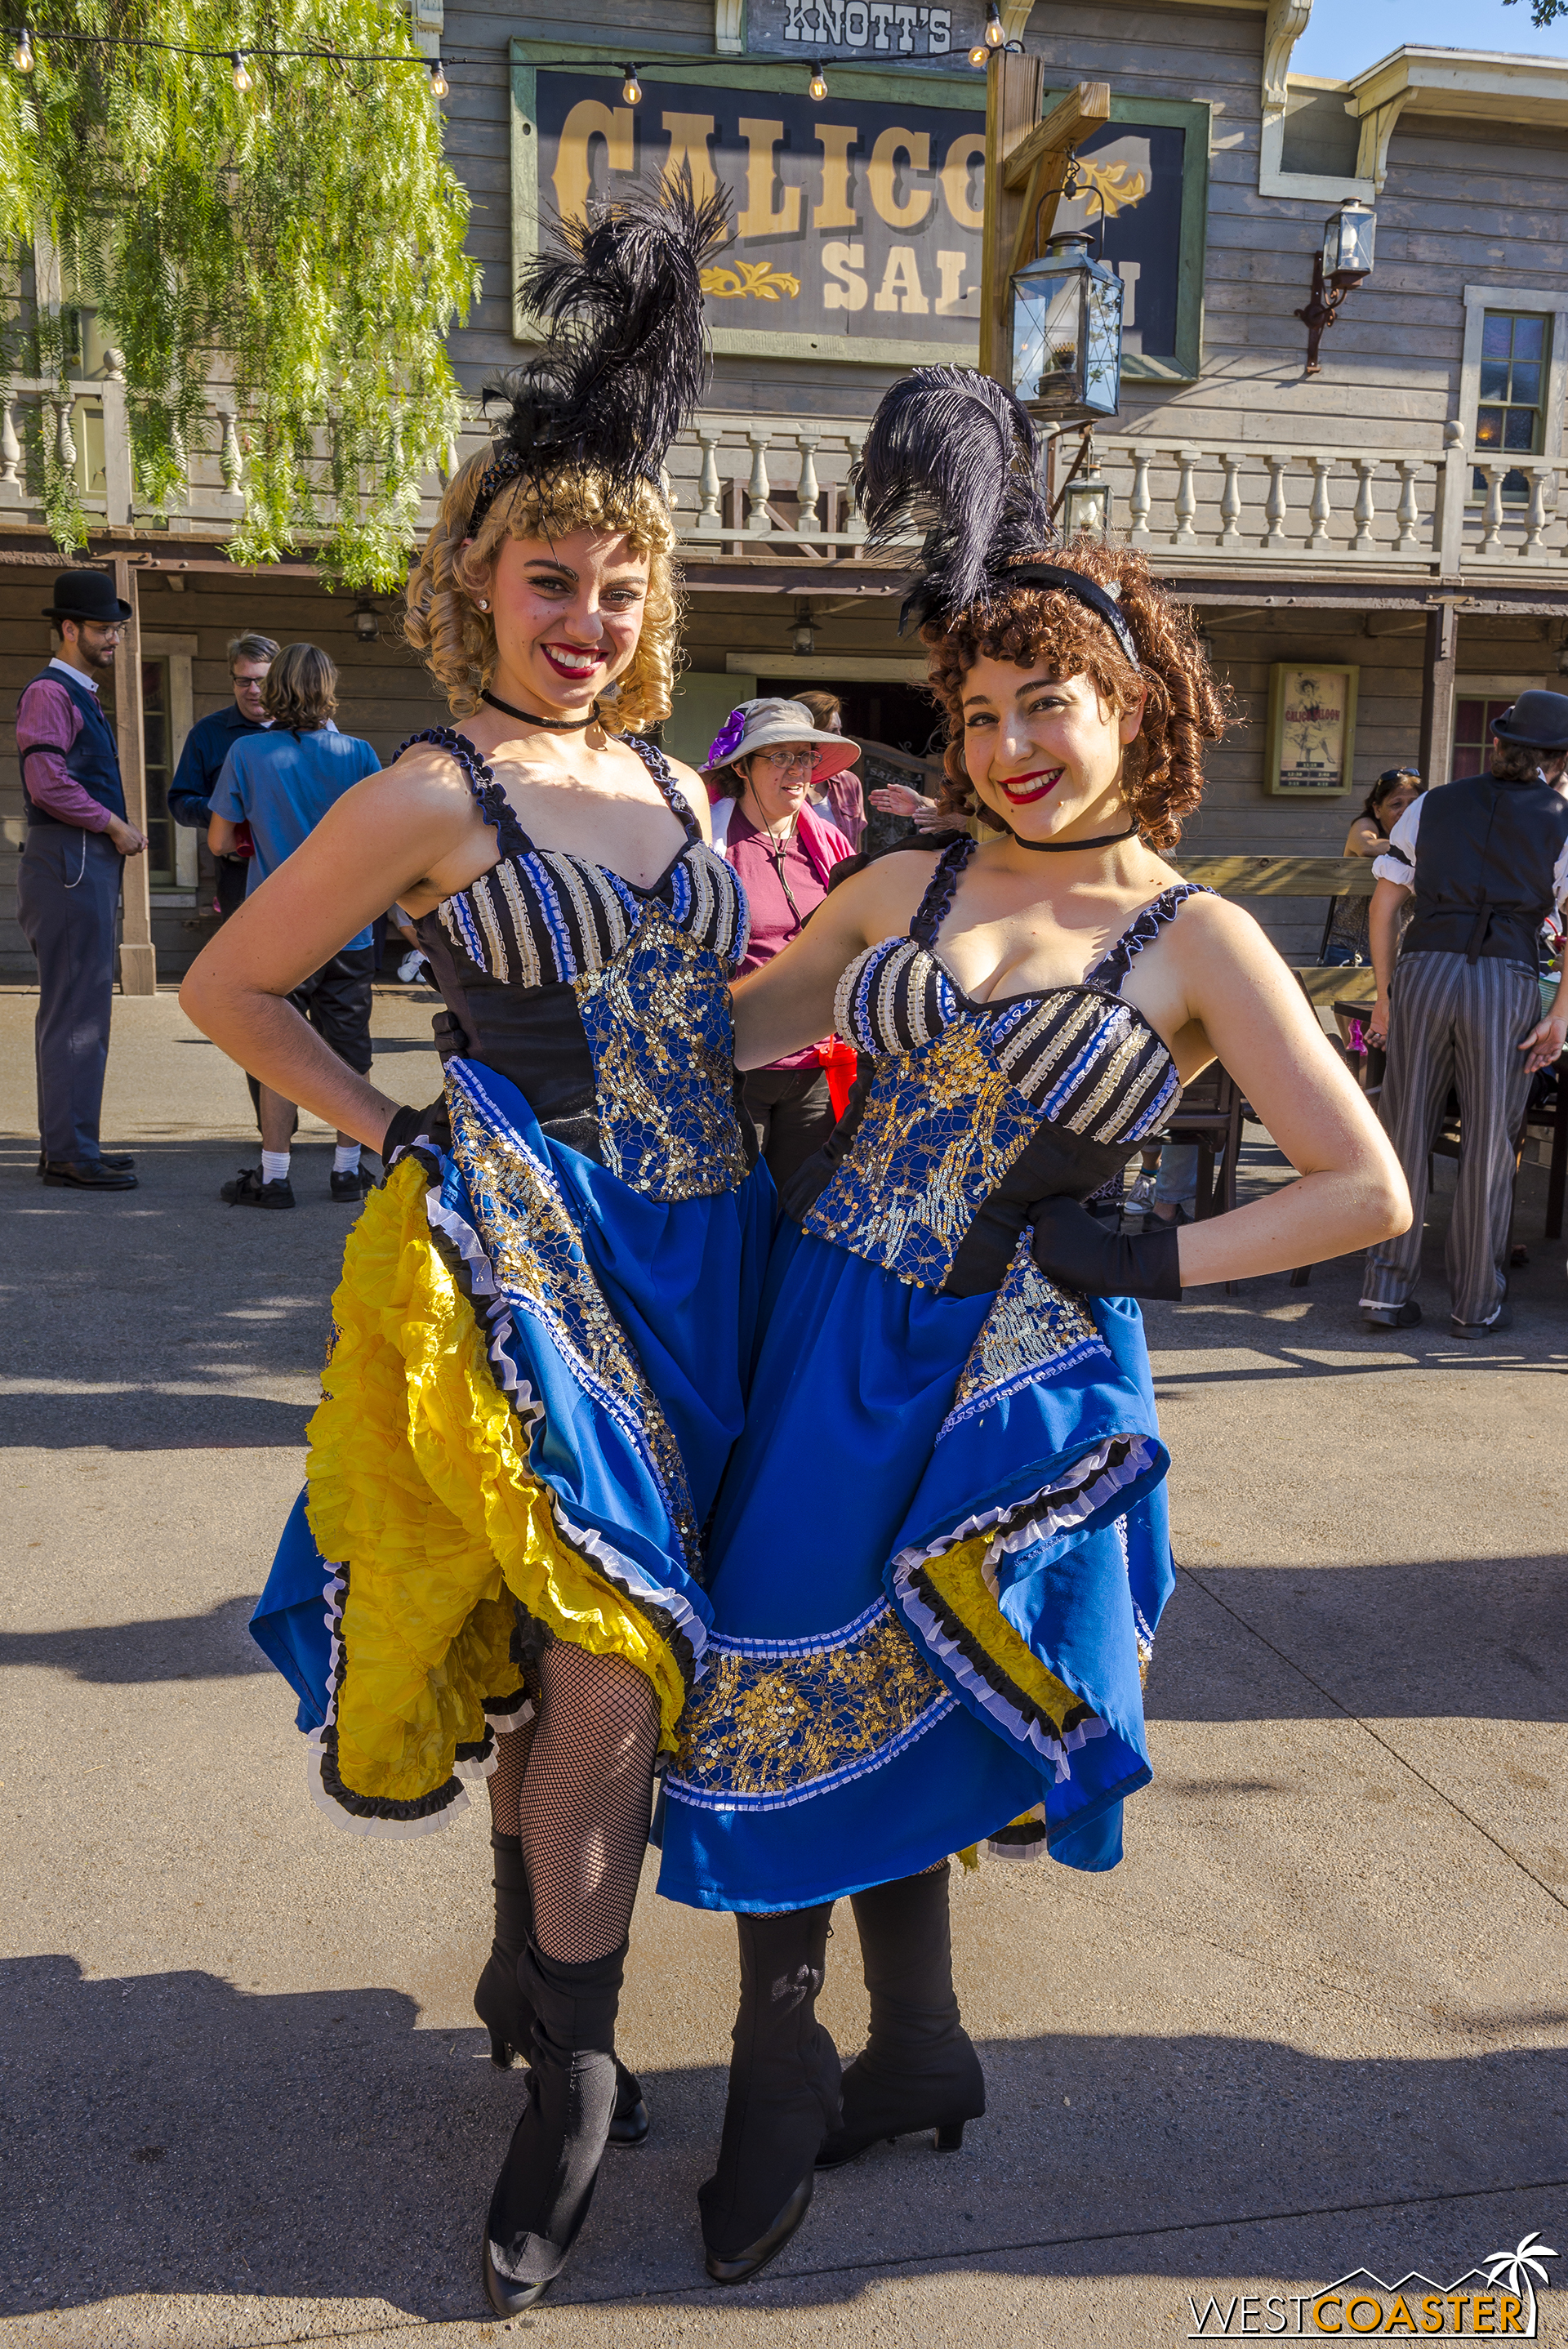  The famous Saloon can-can girls, Dixie and Trixie, are quite popular. 